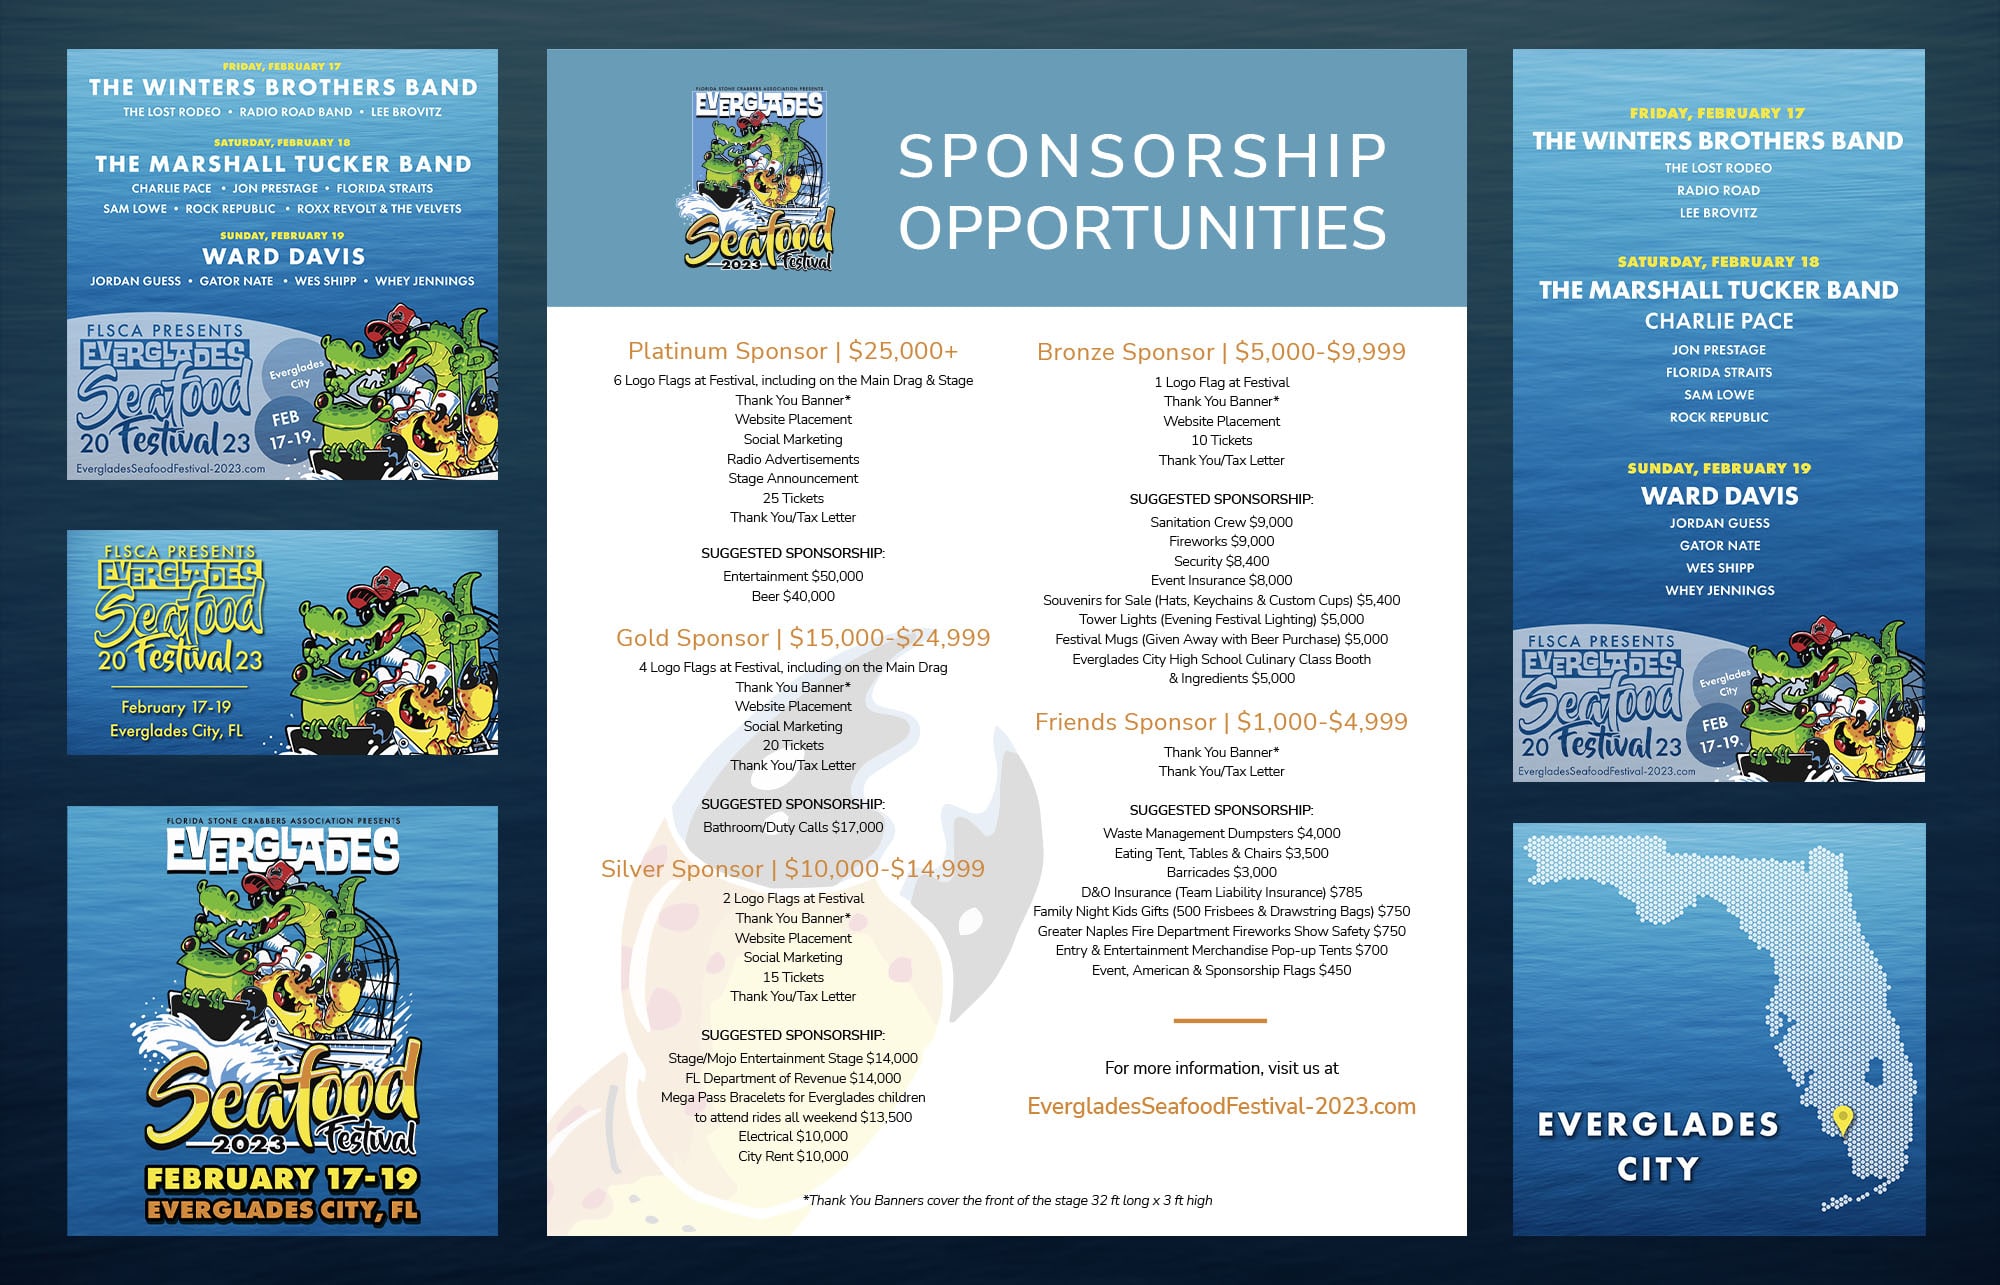 Paradise Web Print and Social Media Marketing Materials for Everglades Seafood Festival